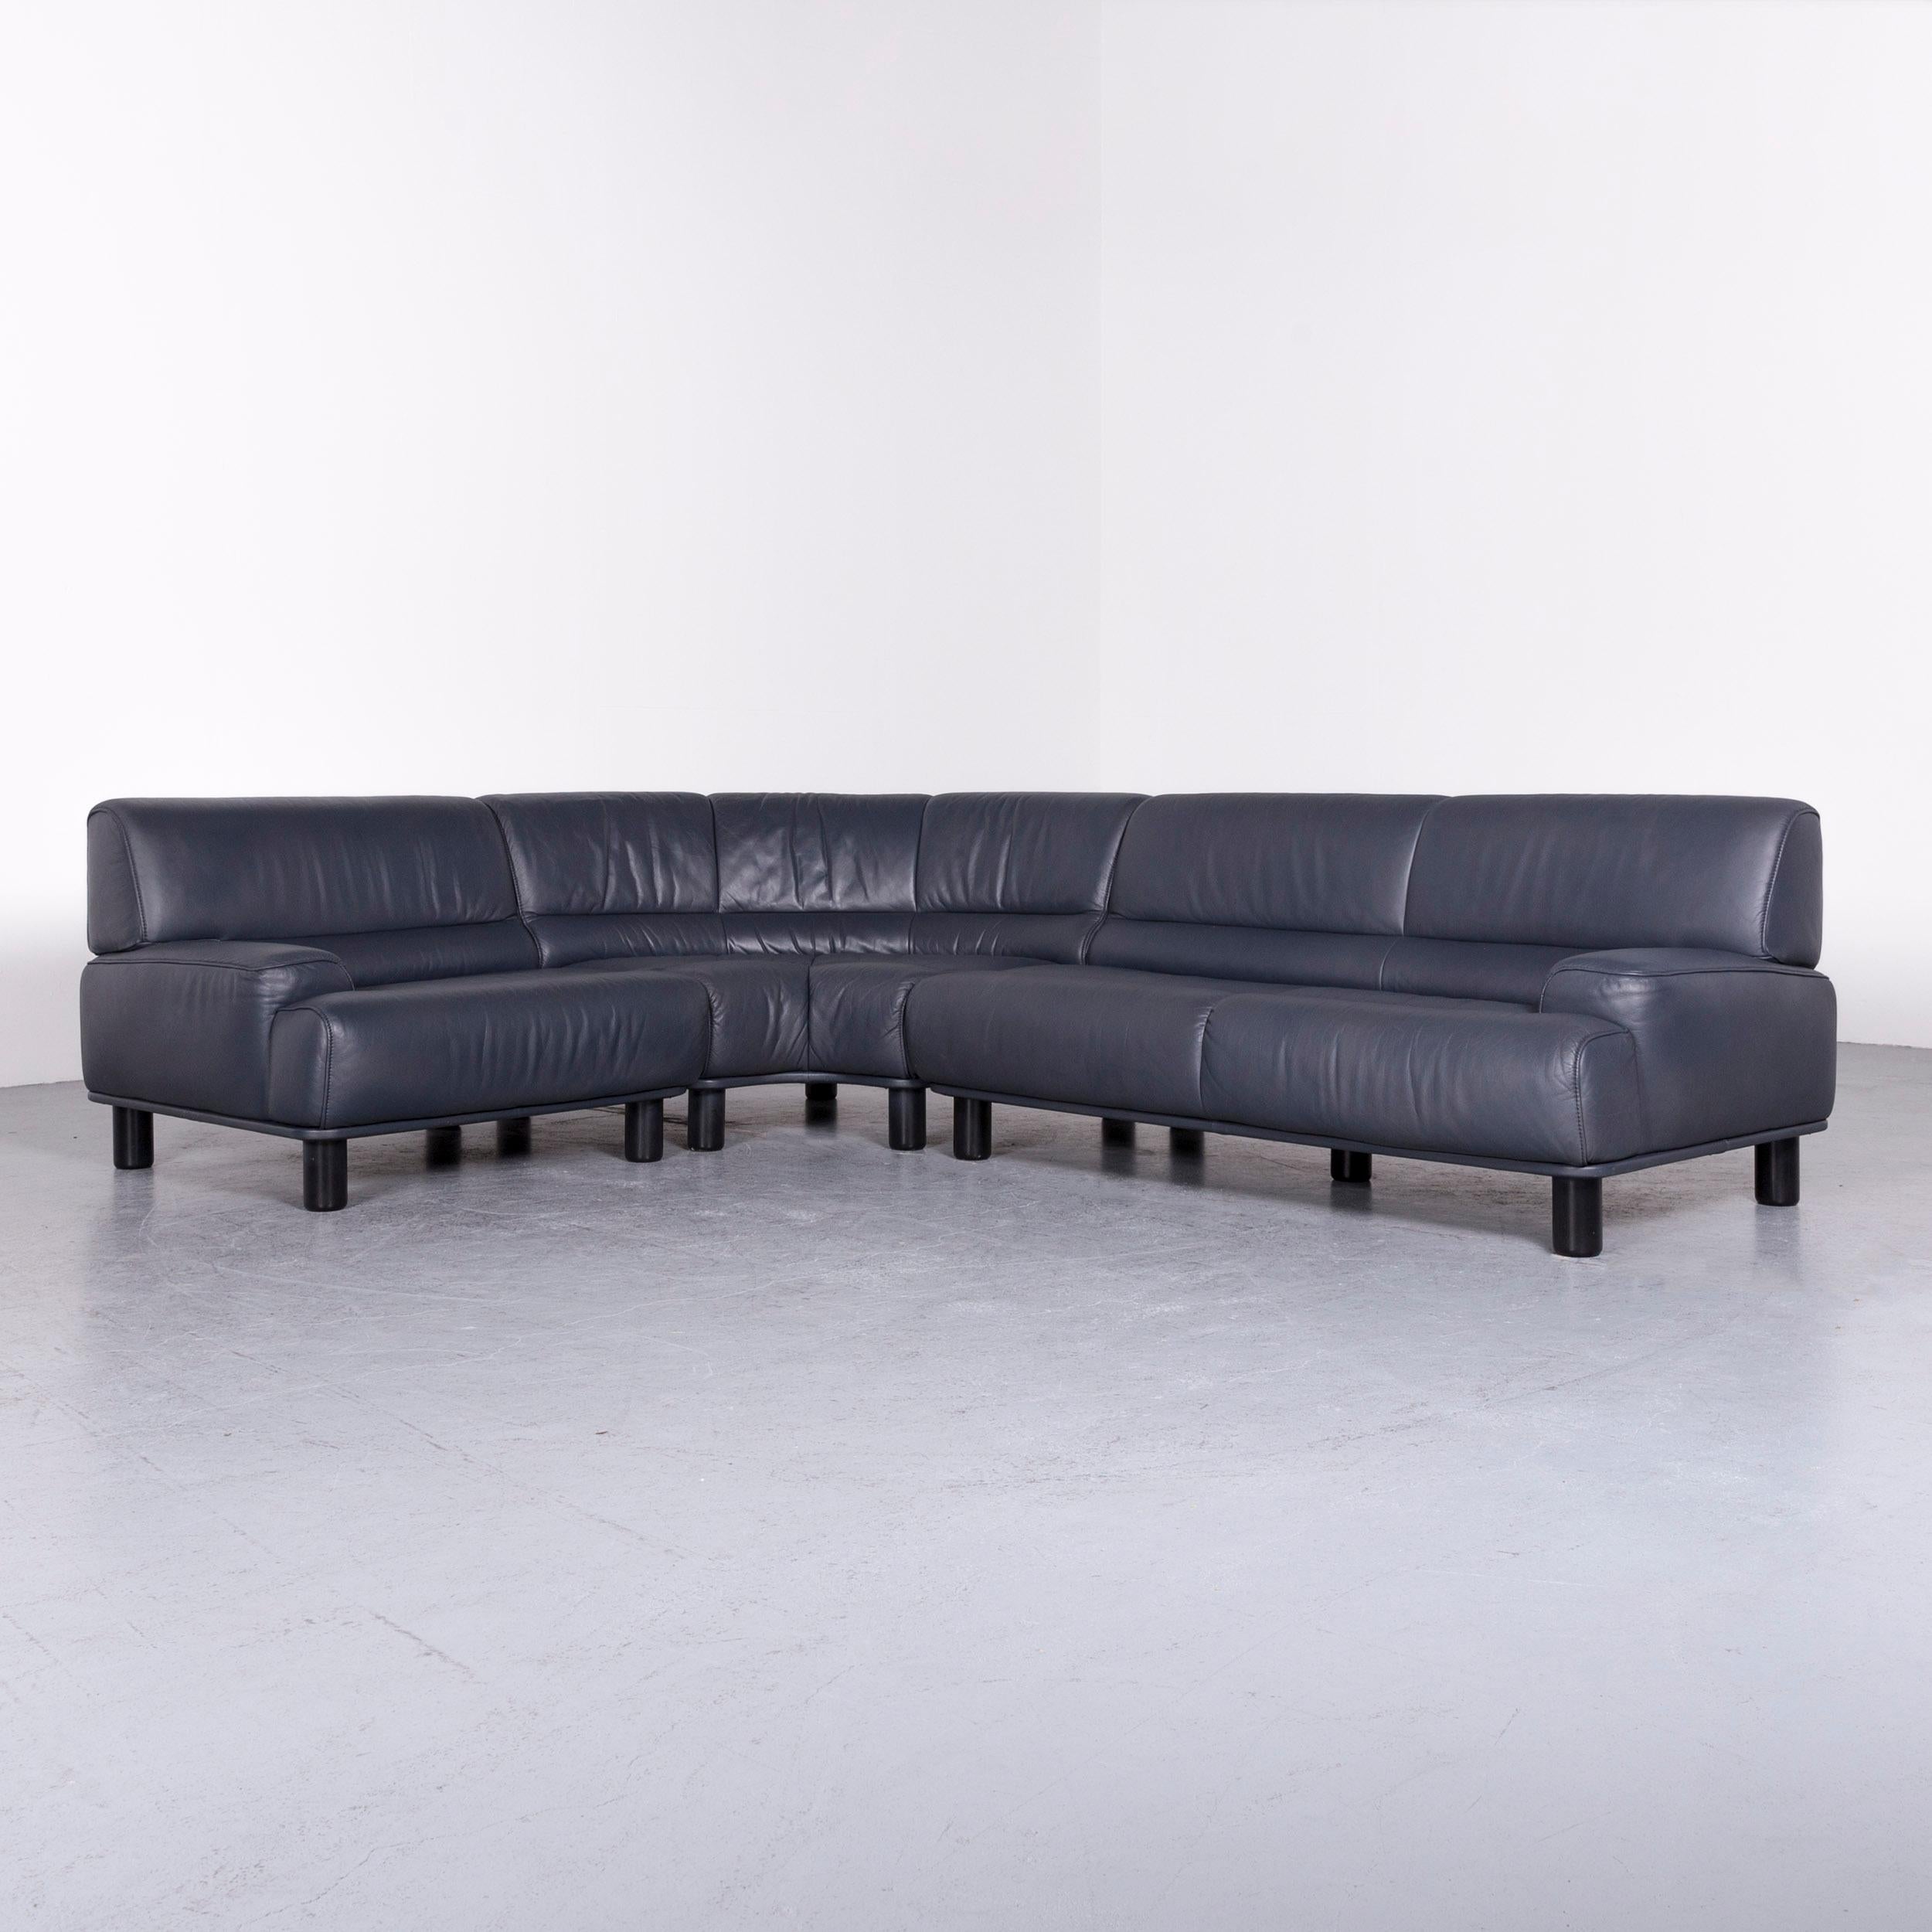 We bring to you a De Sede DS 18 Designer leather corner couch armchair set sofa.